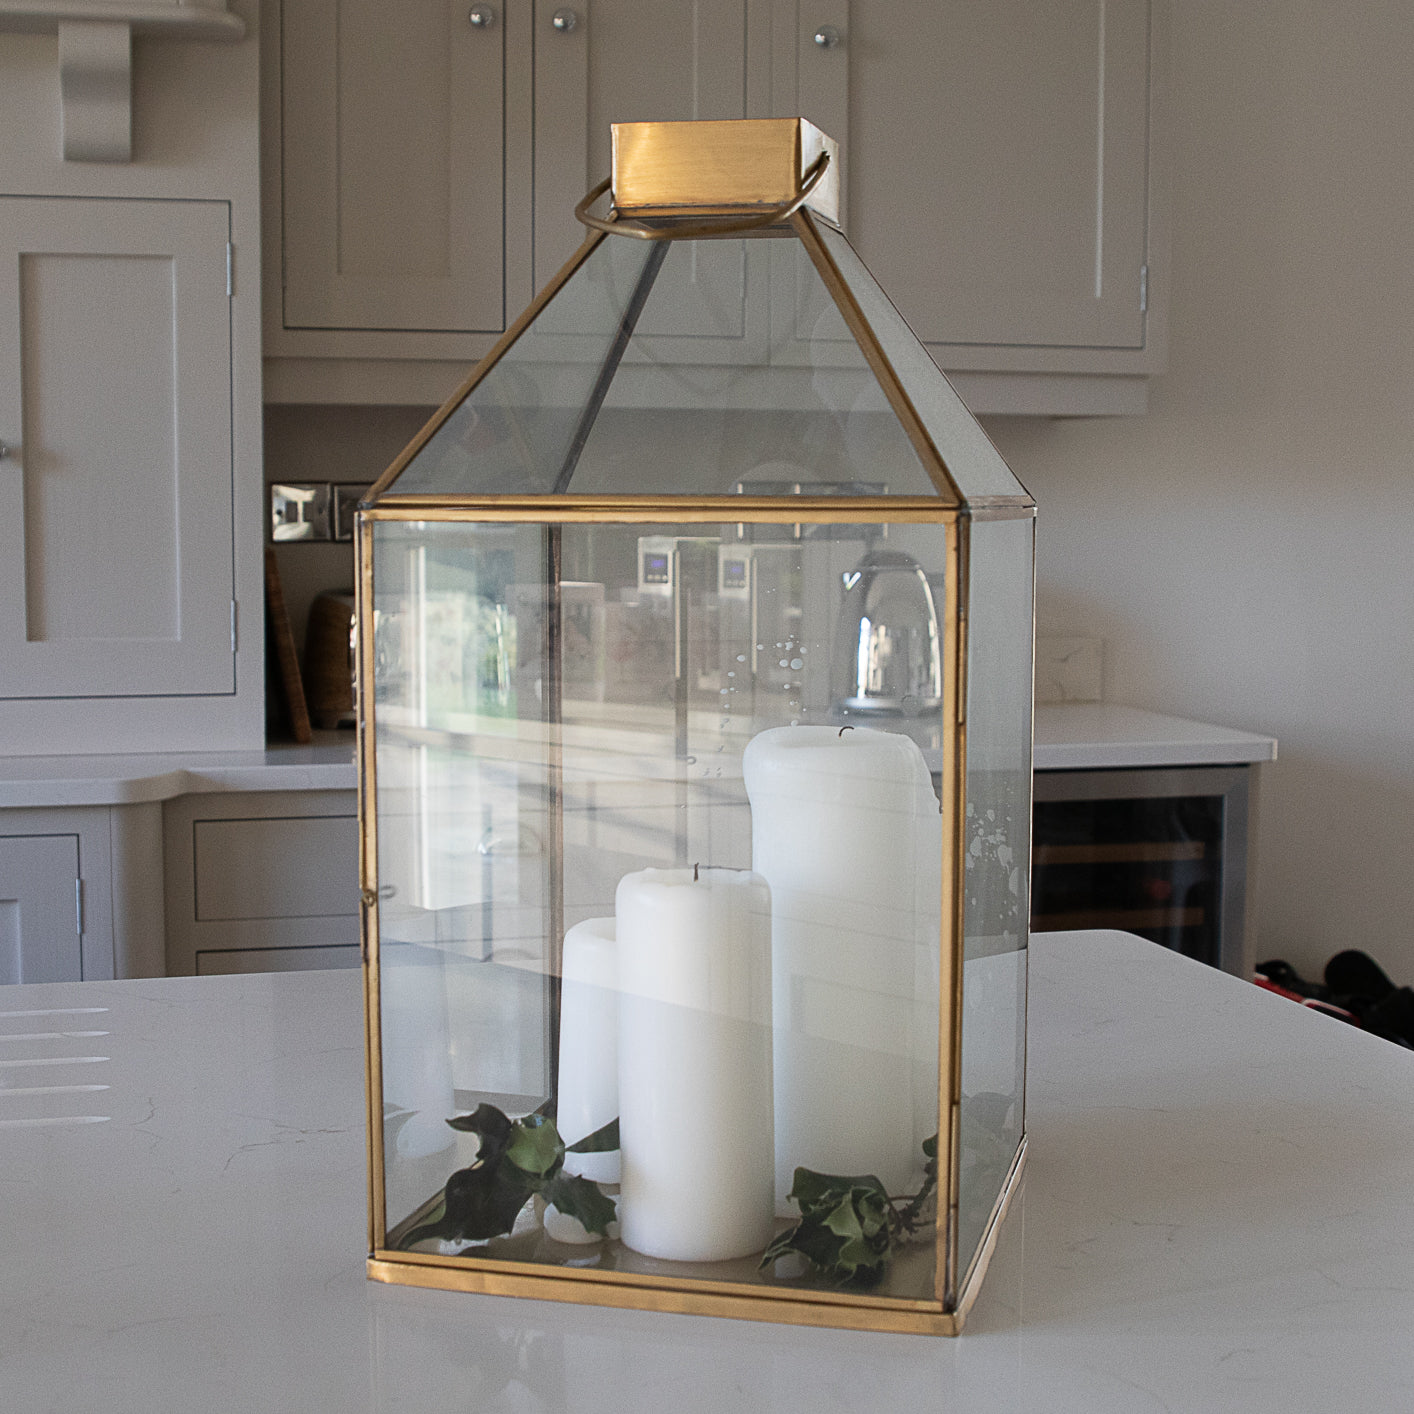 Large Shiny Brass Metal and Glass Square Lantern